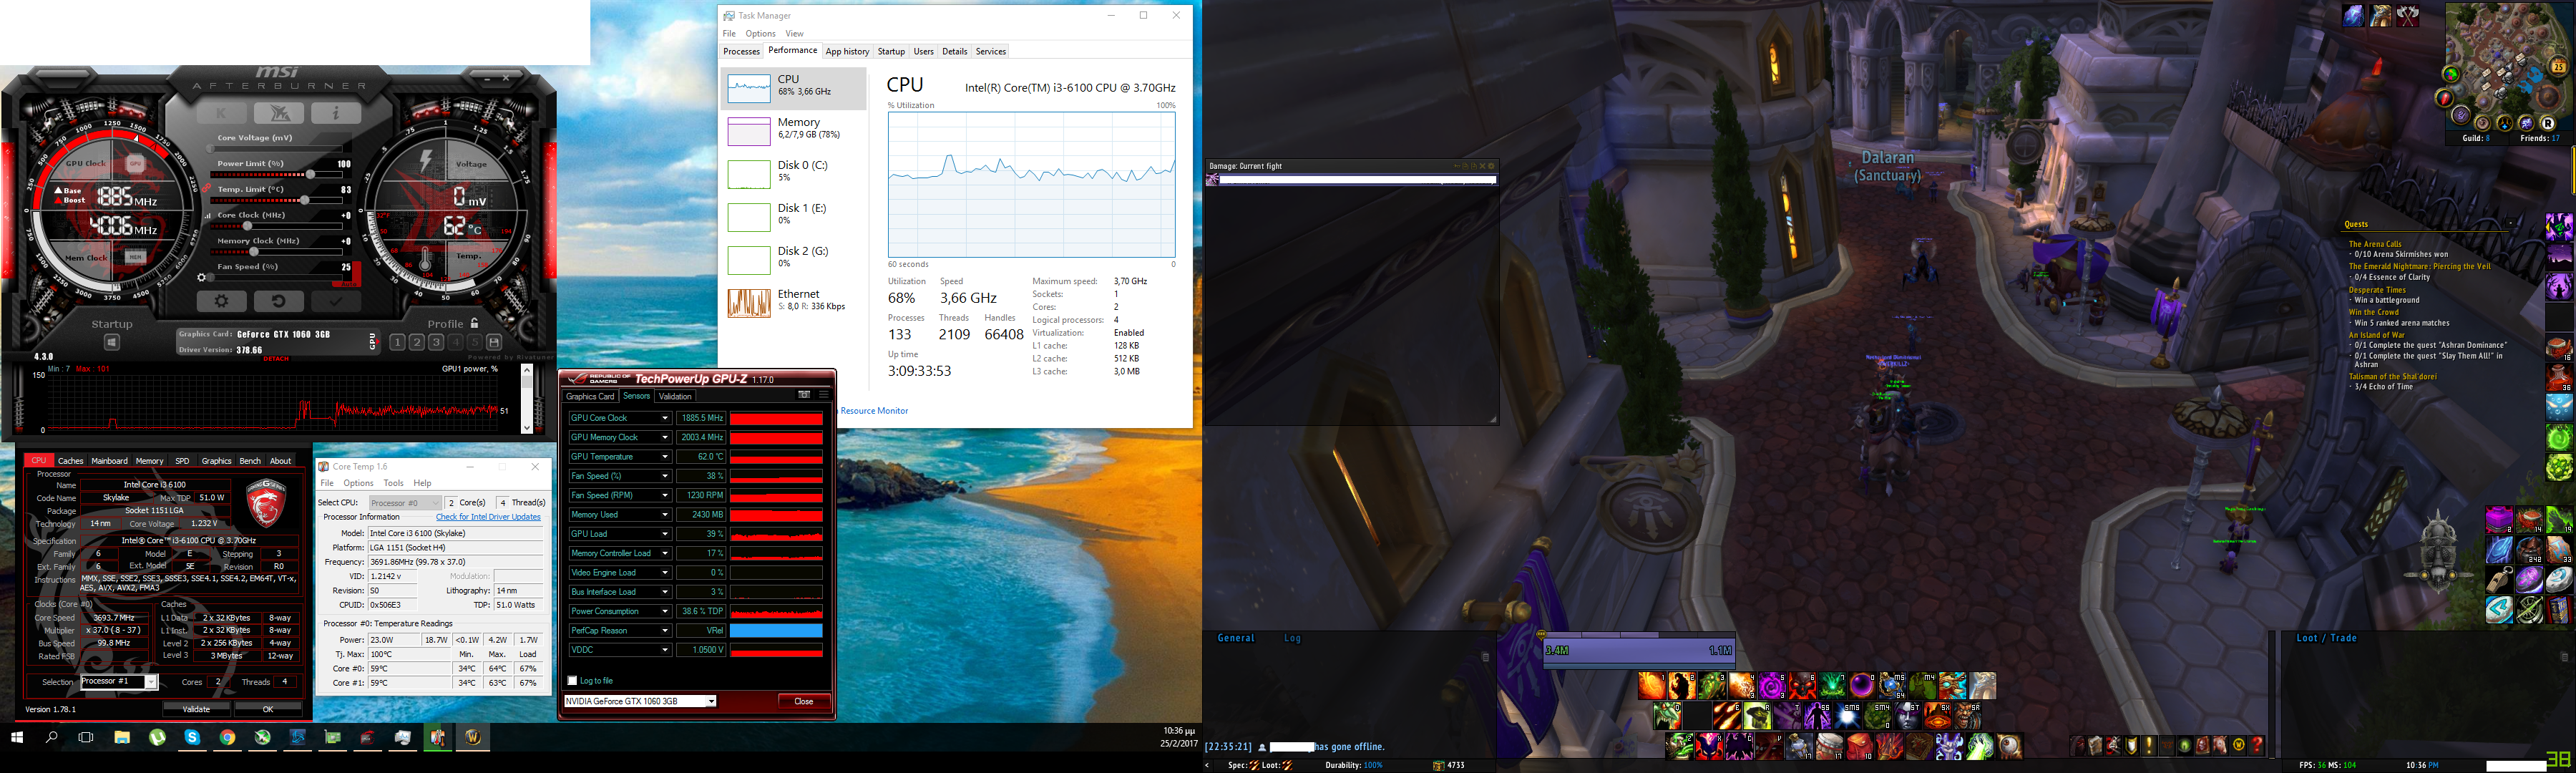 Really low FPS for WoW. - Graphics Cards - Linus Tech Tips